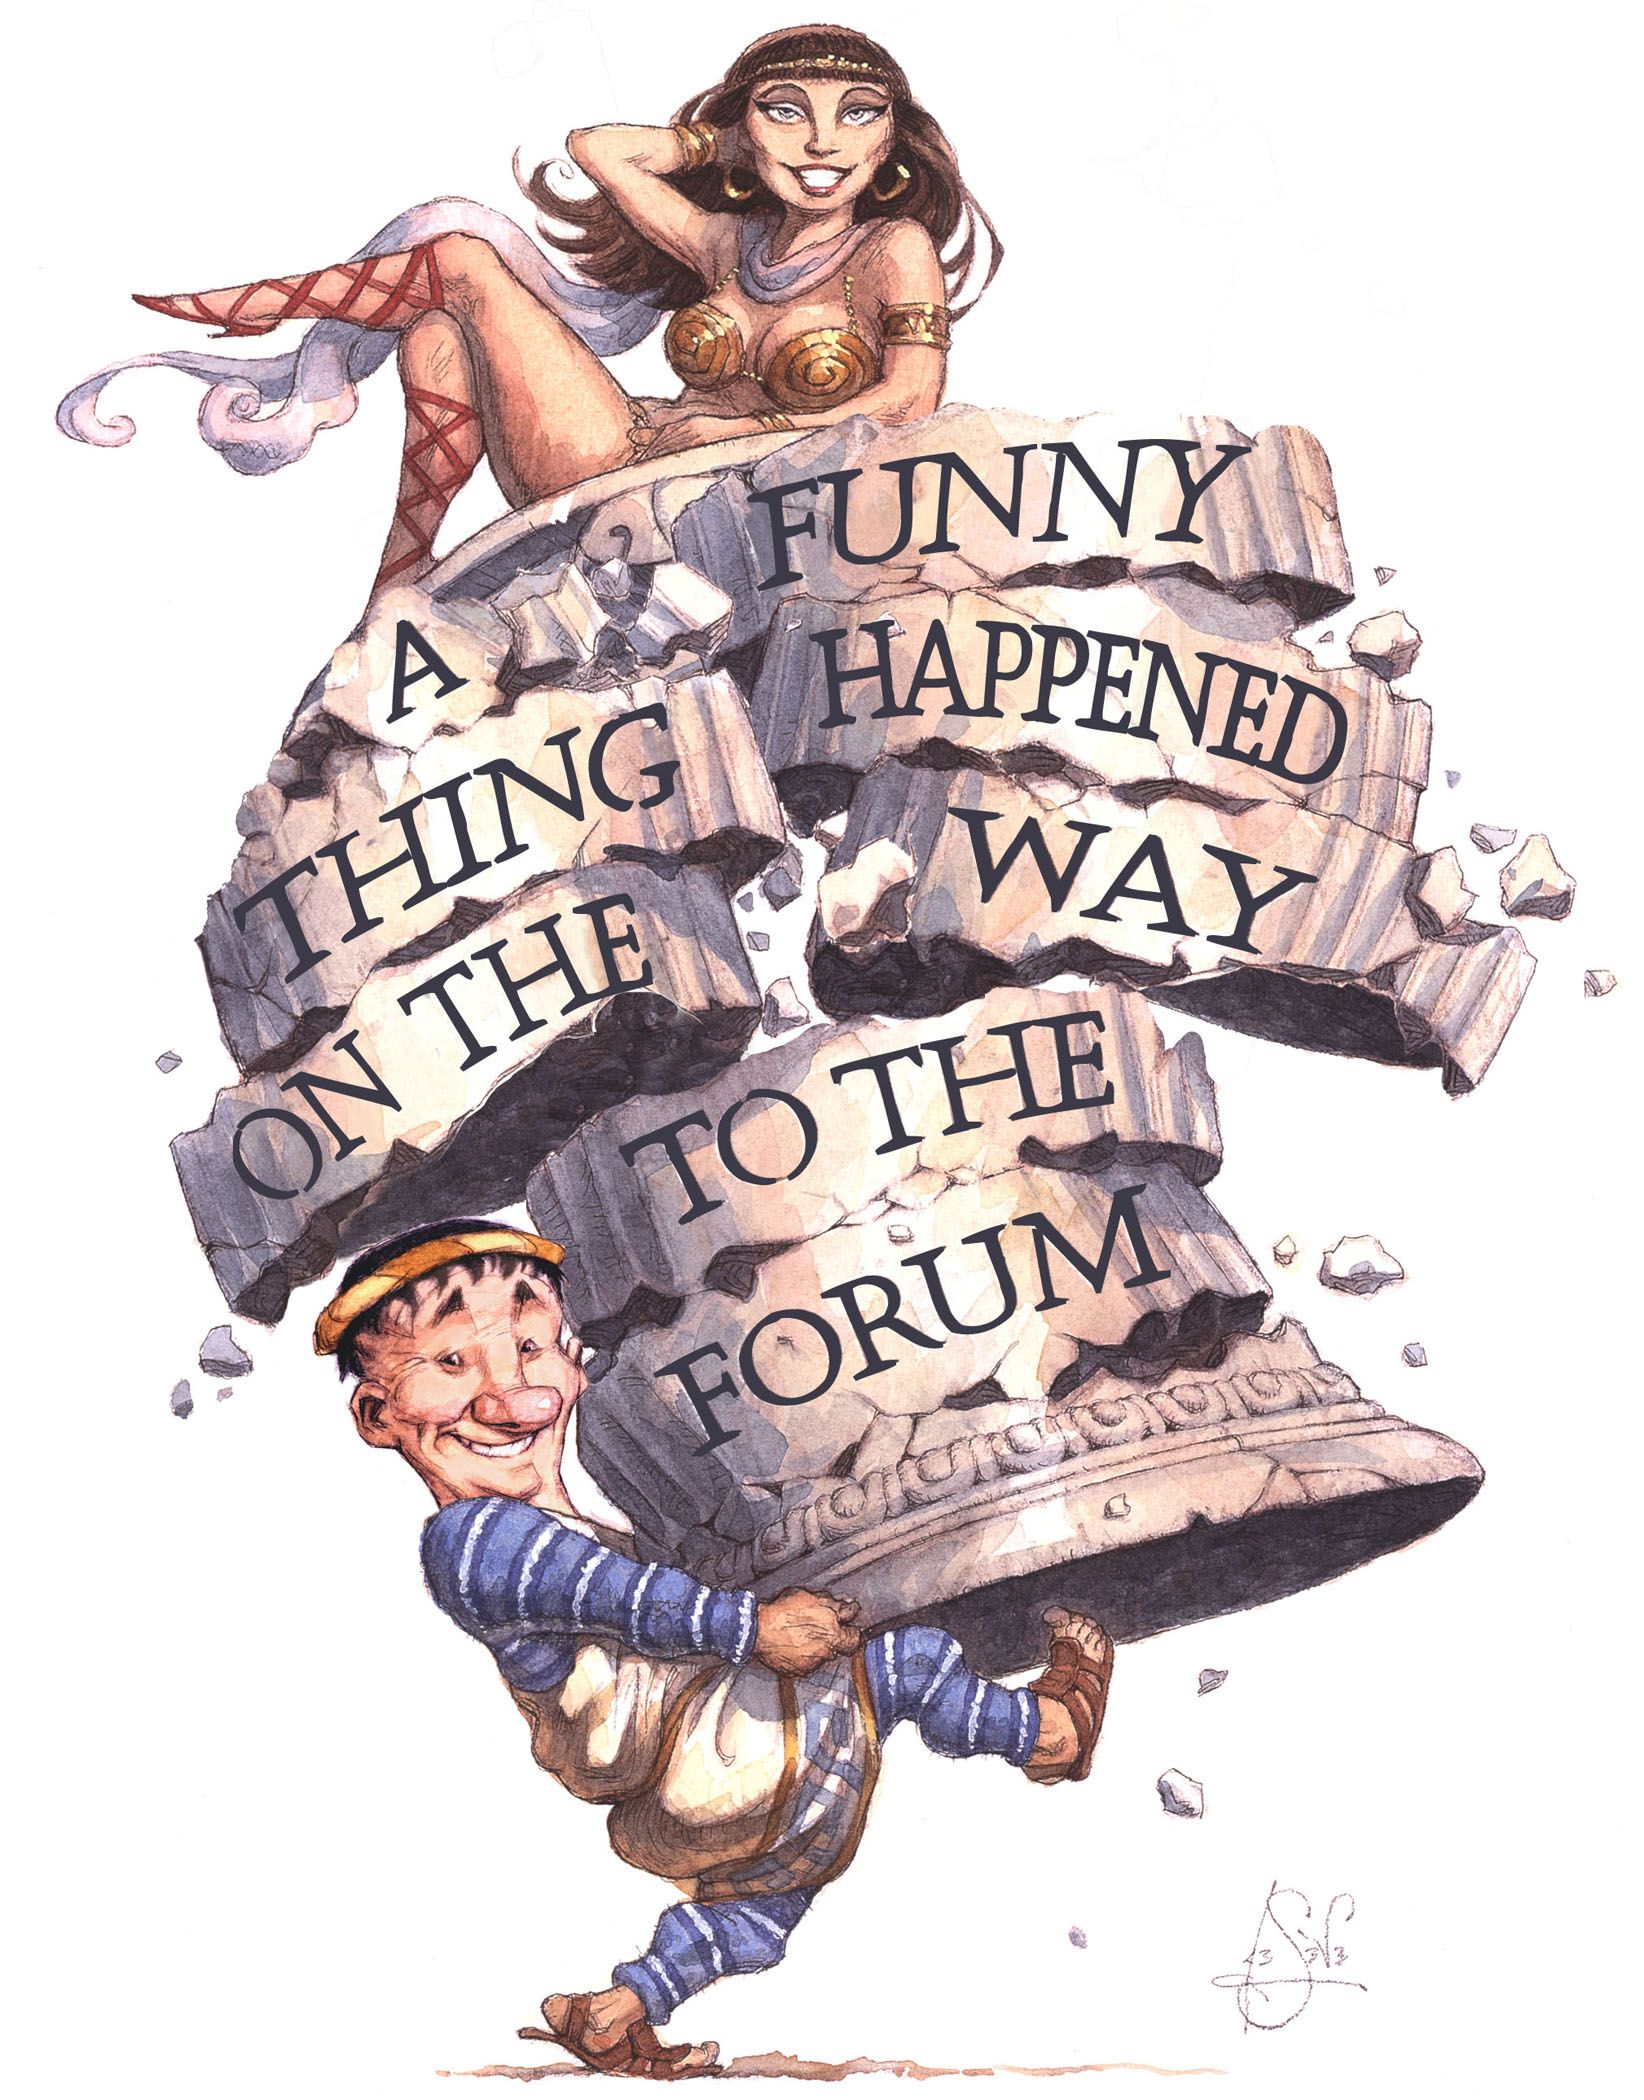 Theatre Review: UFV’s A Funny Thing Happened on the Way to the Forum